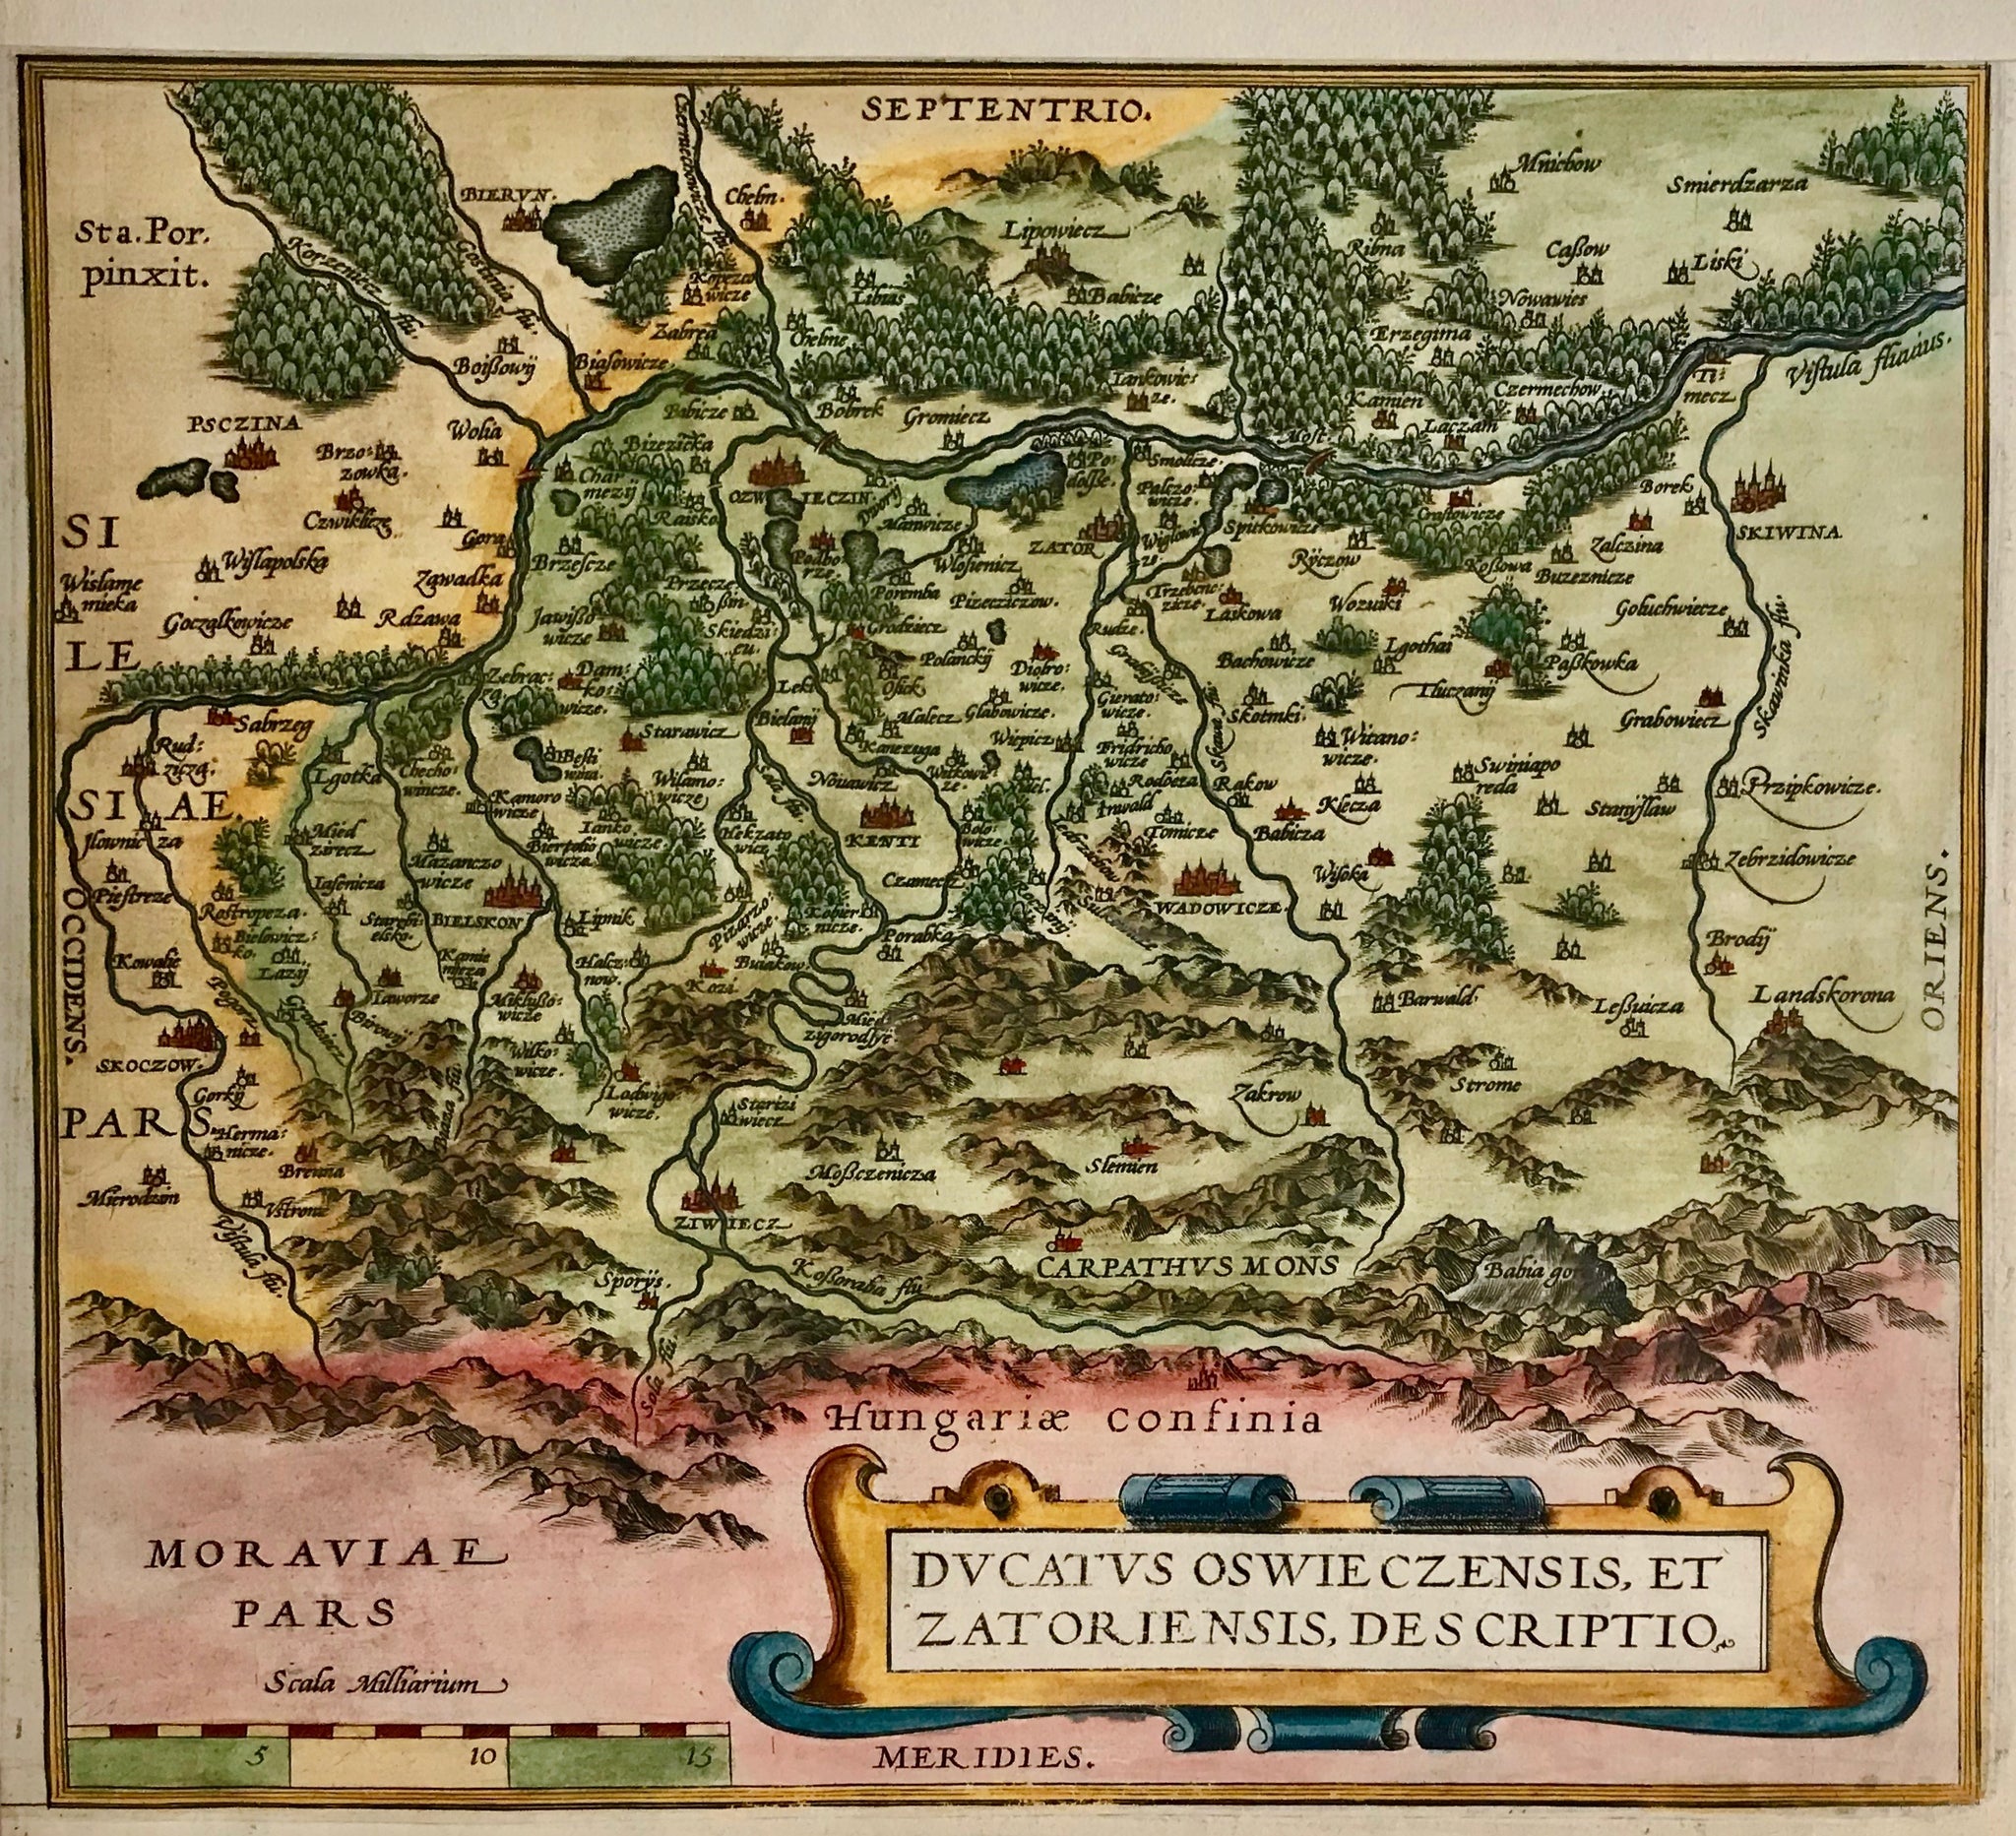 "Ducatus Oswieczensis et Zatoriensis Descriptio"  Copper engraving from the atlas "Theatrum Orbis Terrarum" by Abraham Ortelius ca 1580.  Map of the area around Zator and Auschwitz (Oświecim). In the center is Wadowice. The Vistula River begins in the lower left and "Flows out" in the upper right of the map.